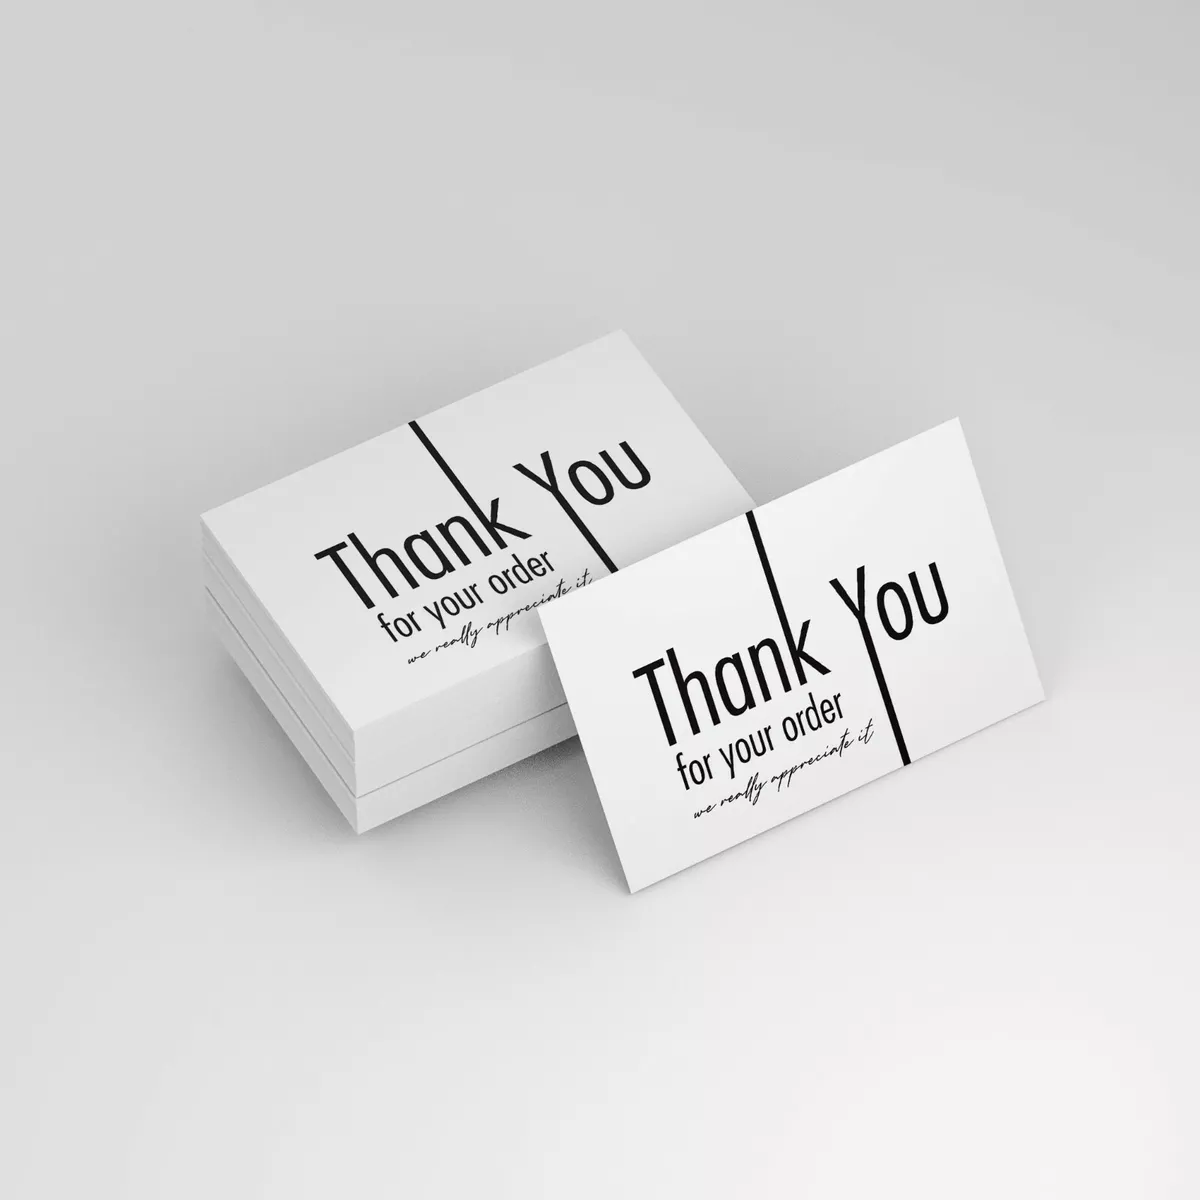 Thank You For Your Order Cards, Business Cards, Loyalty Cards, Note Cards